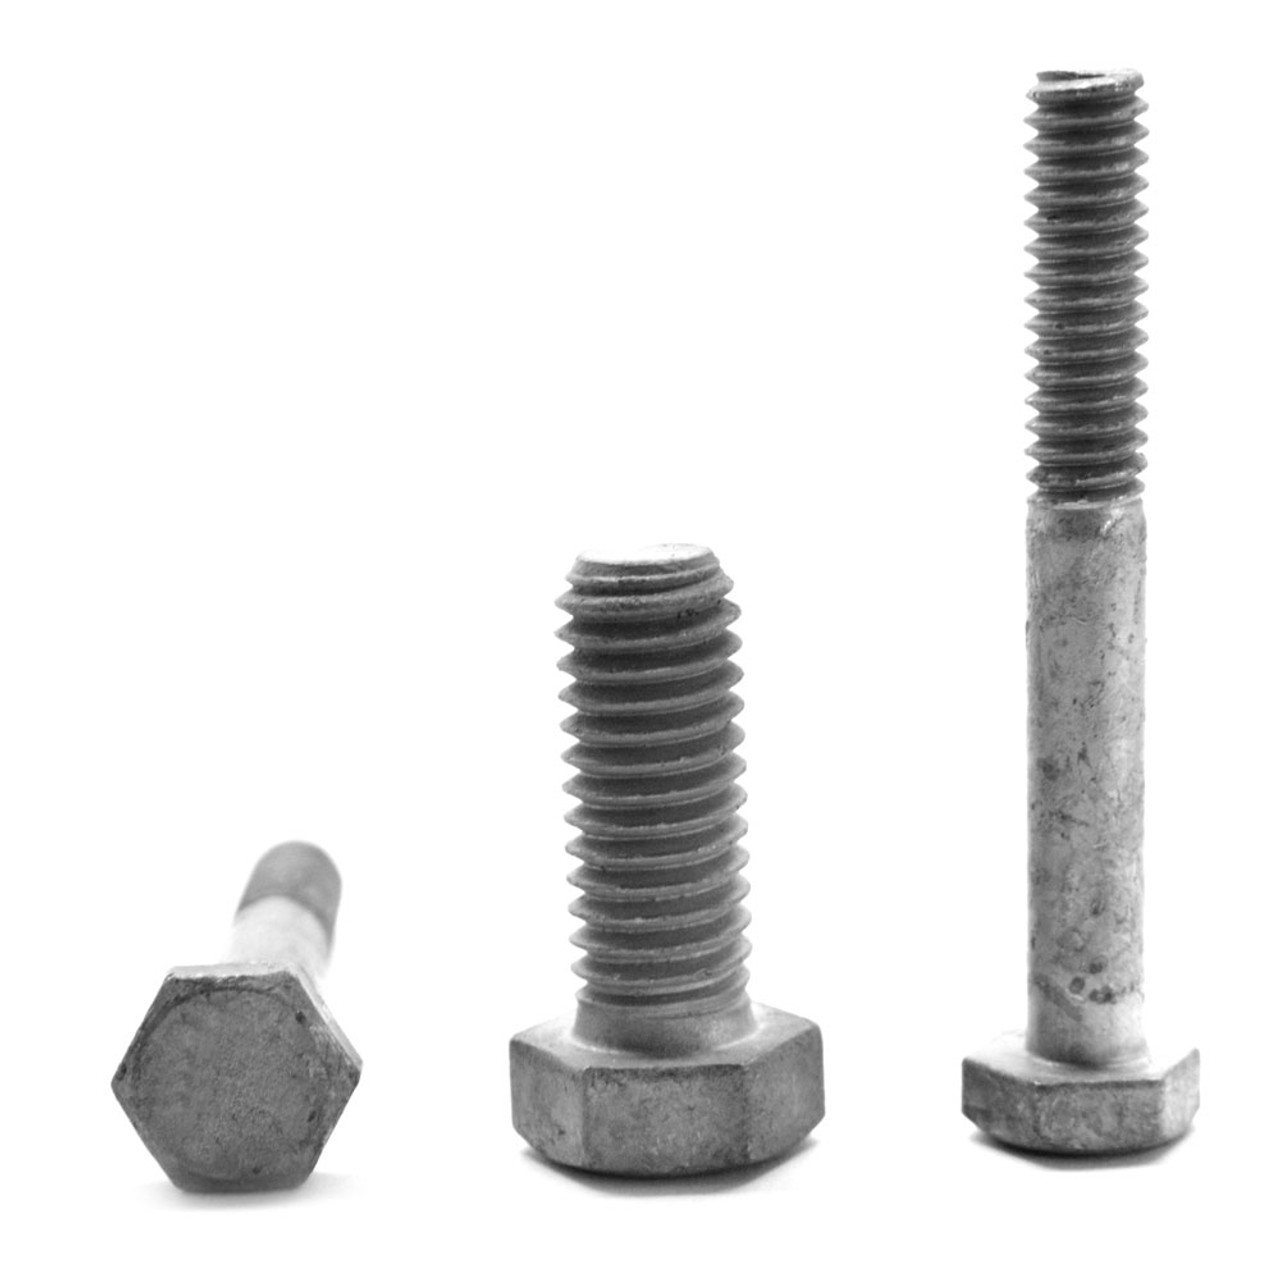 1/2"-13 x 14"6"THD UNDER-SIZED Coarse Thread A307 Grade A Hex Bolt Low Carbon Steel Hot Dip Galvanized